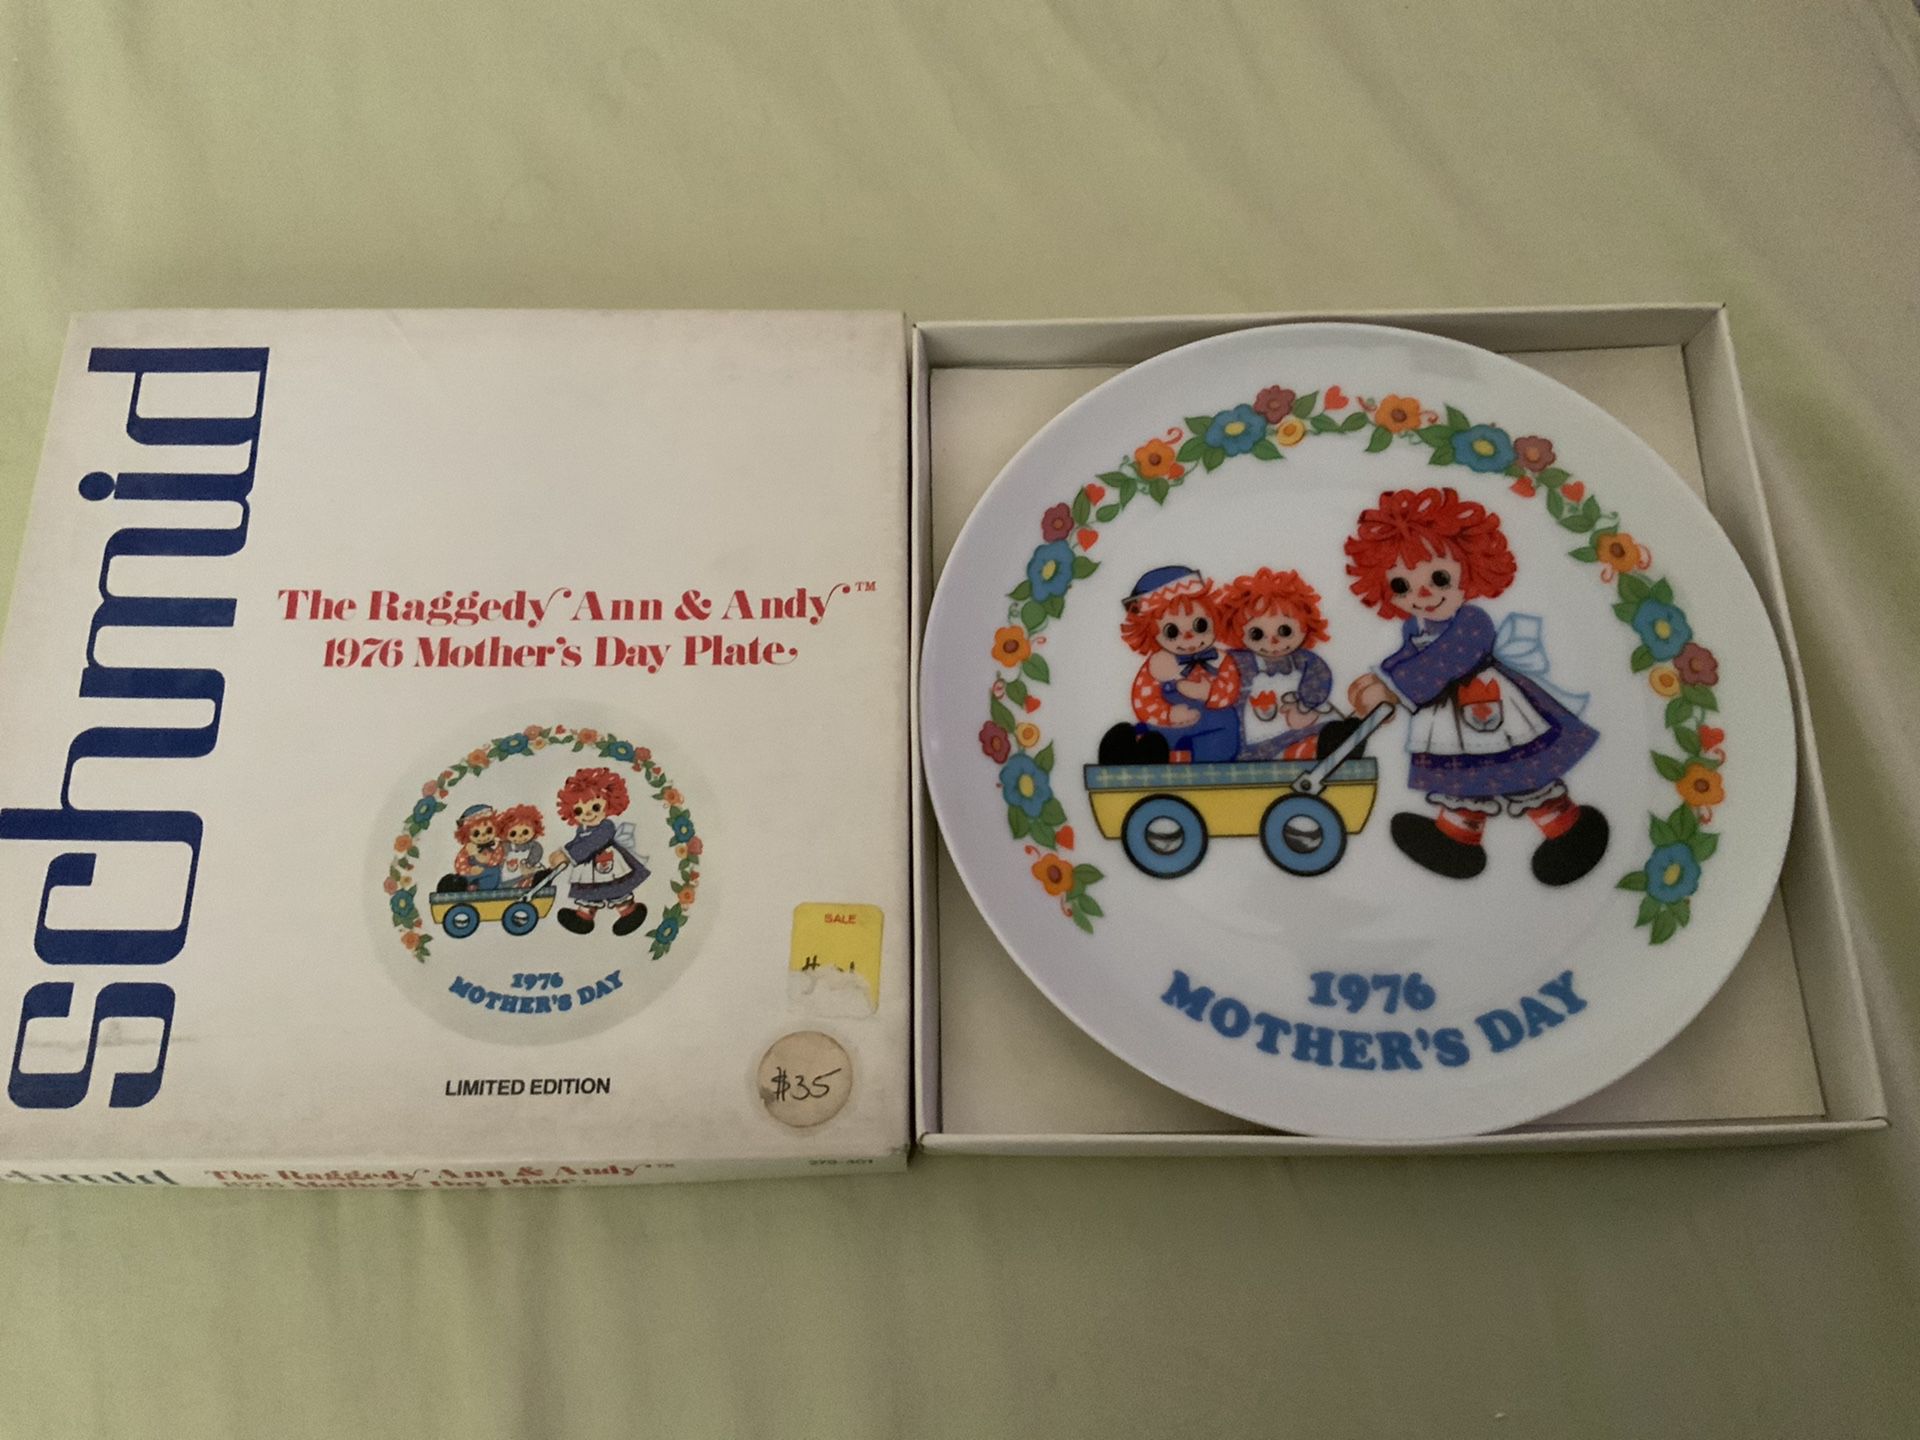 THE SCHMID COLLECTIONS “THE RAGGEDY ANN & ANDY PLATE IN ORIGINAL BOX #1